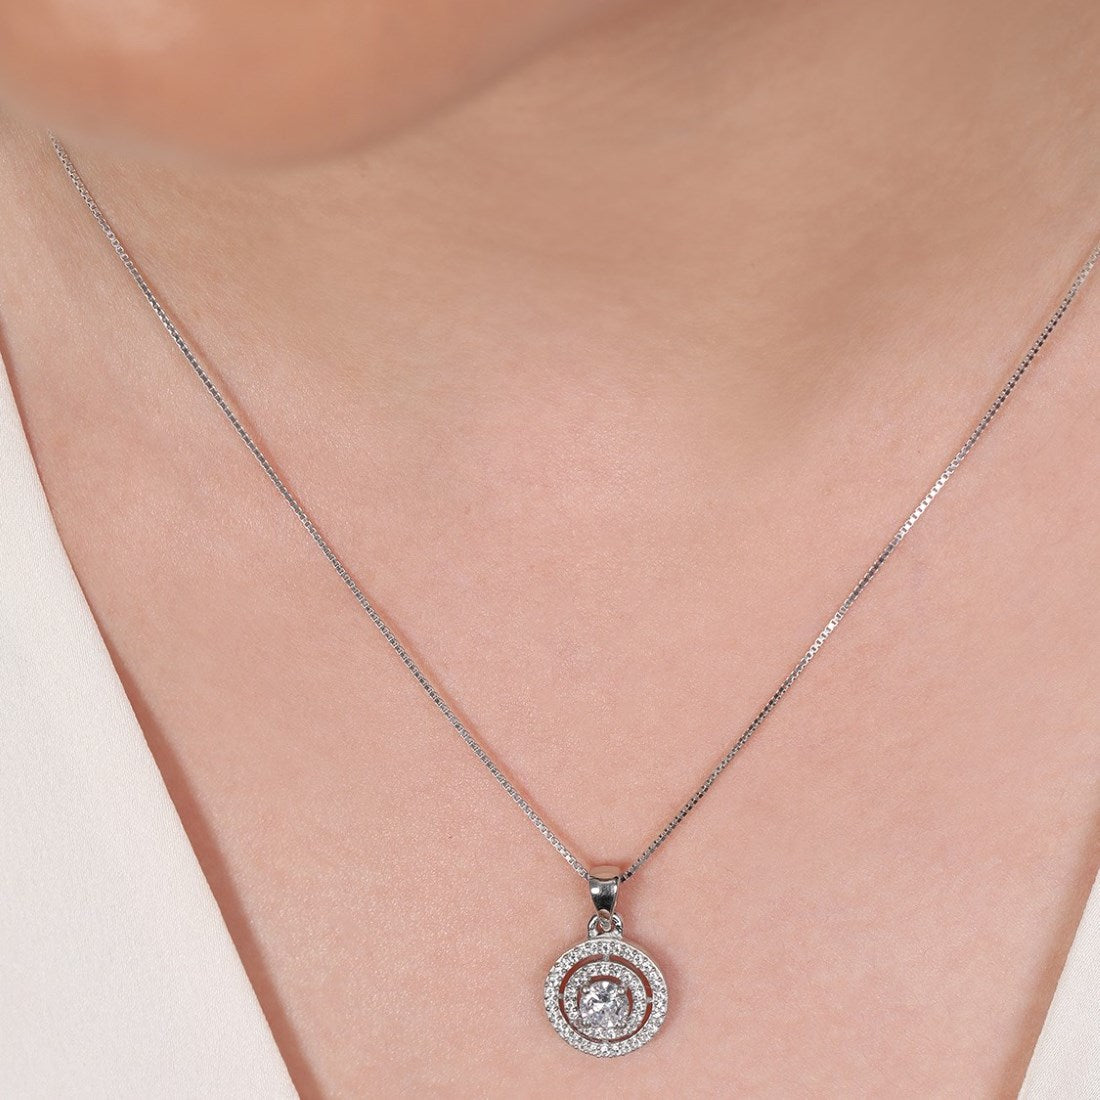 Eternal Circles Rhodium-Plated 925 Sterling Silver Pendant with Chain